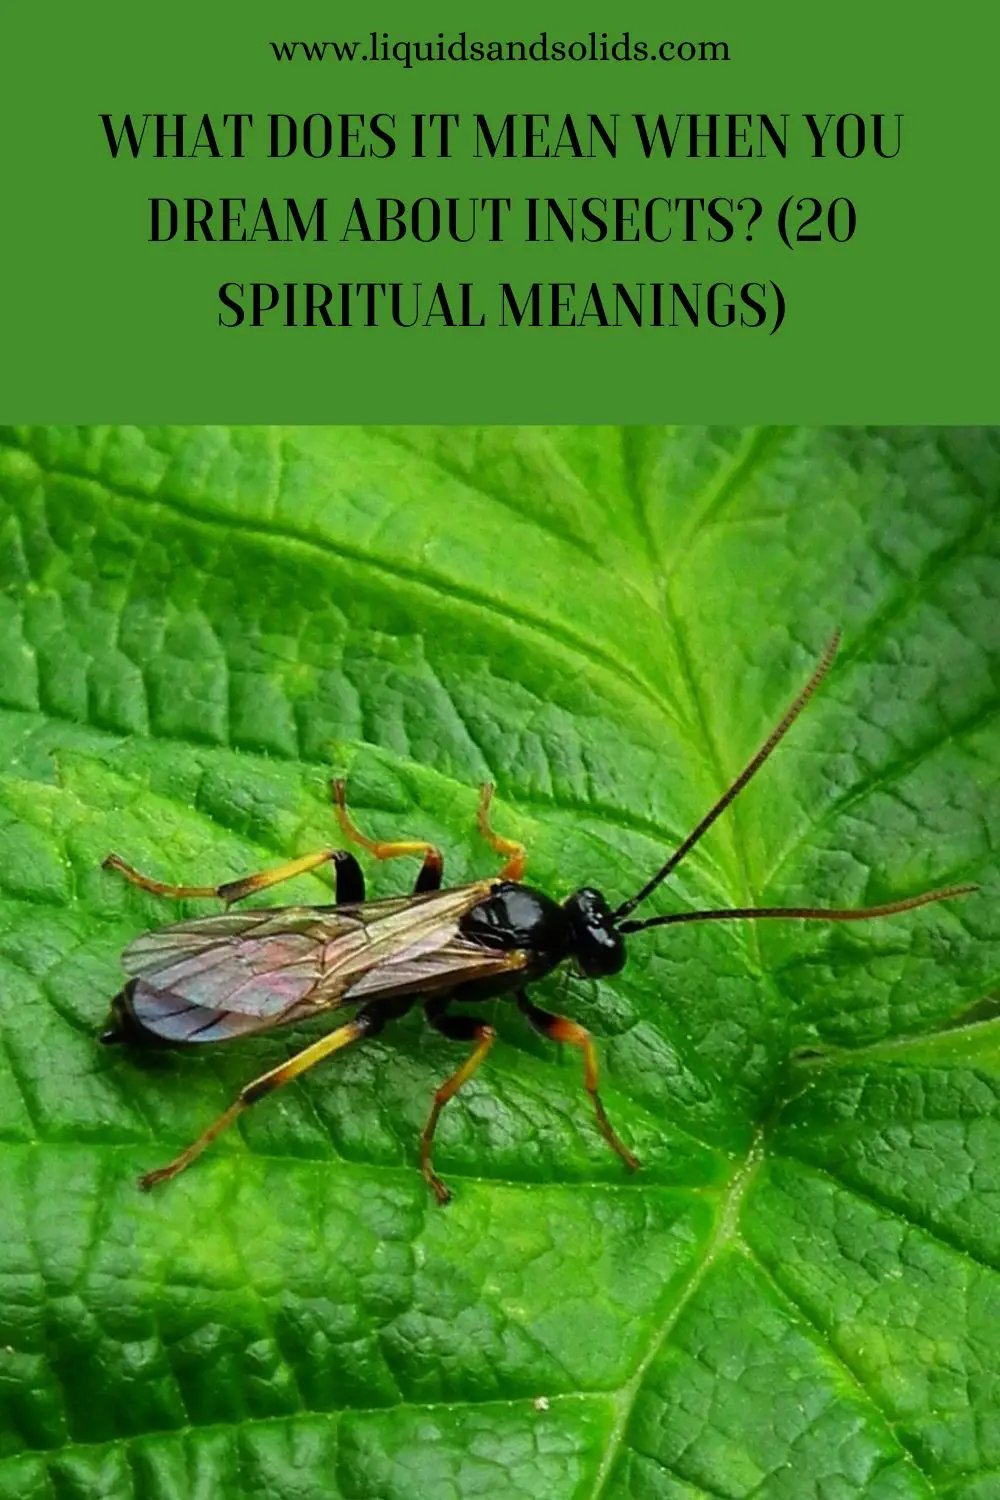 Spiritual Meaning Of Insects In Dreams